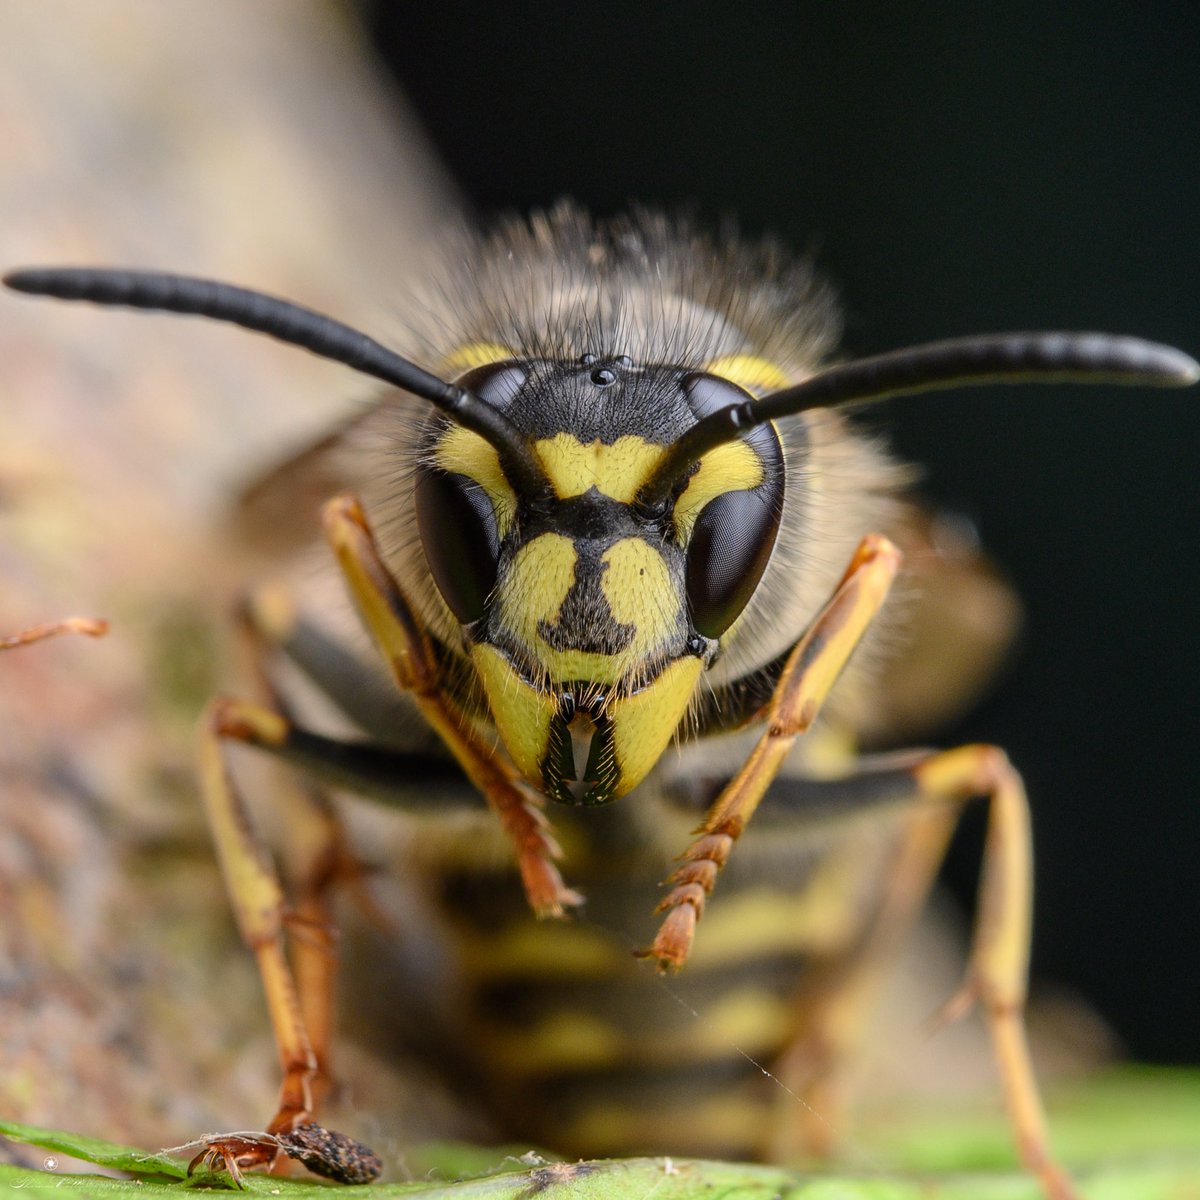 Even physiognomy works in insects. Which one of these insects appears more likely to bite you for literally no reason whatsoever? (Hint: it’s the gayass wasp)